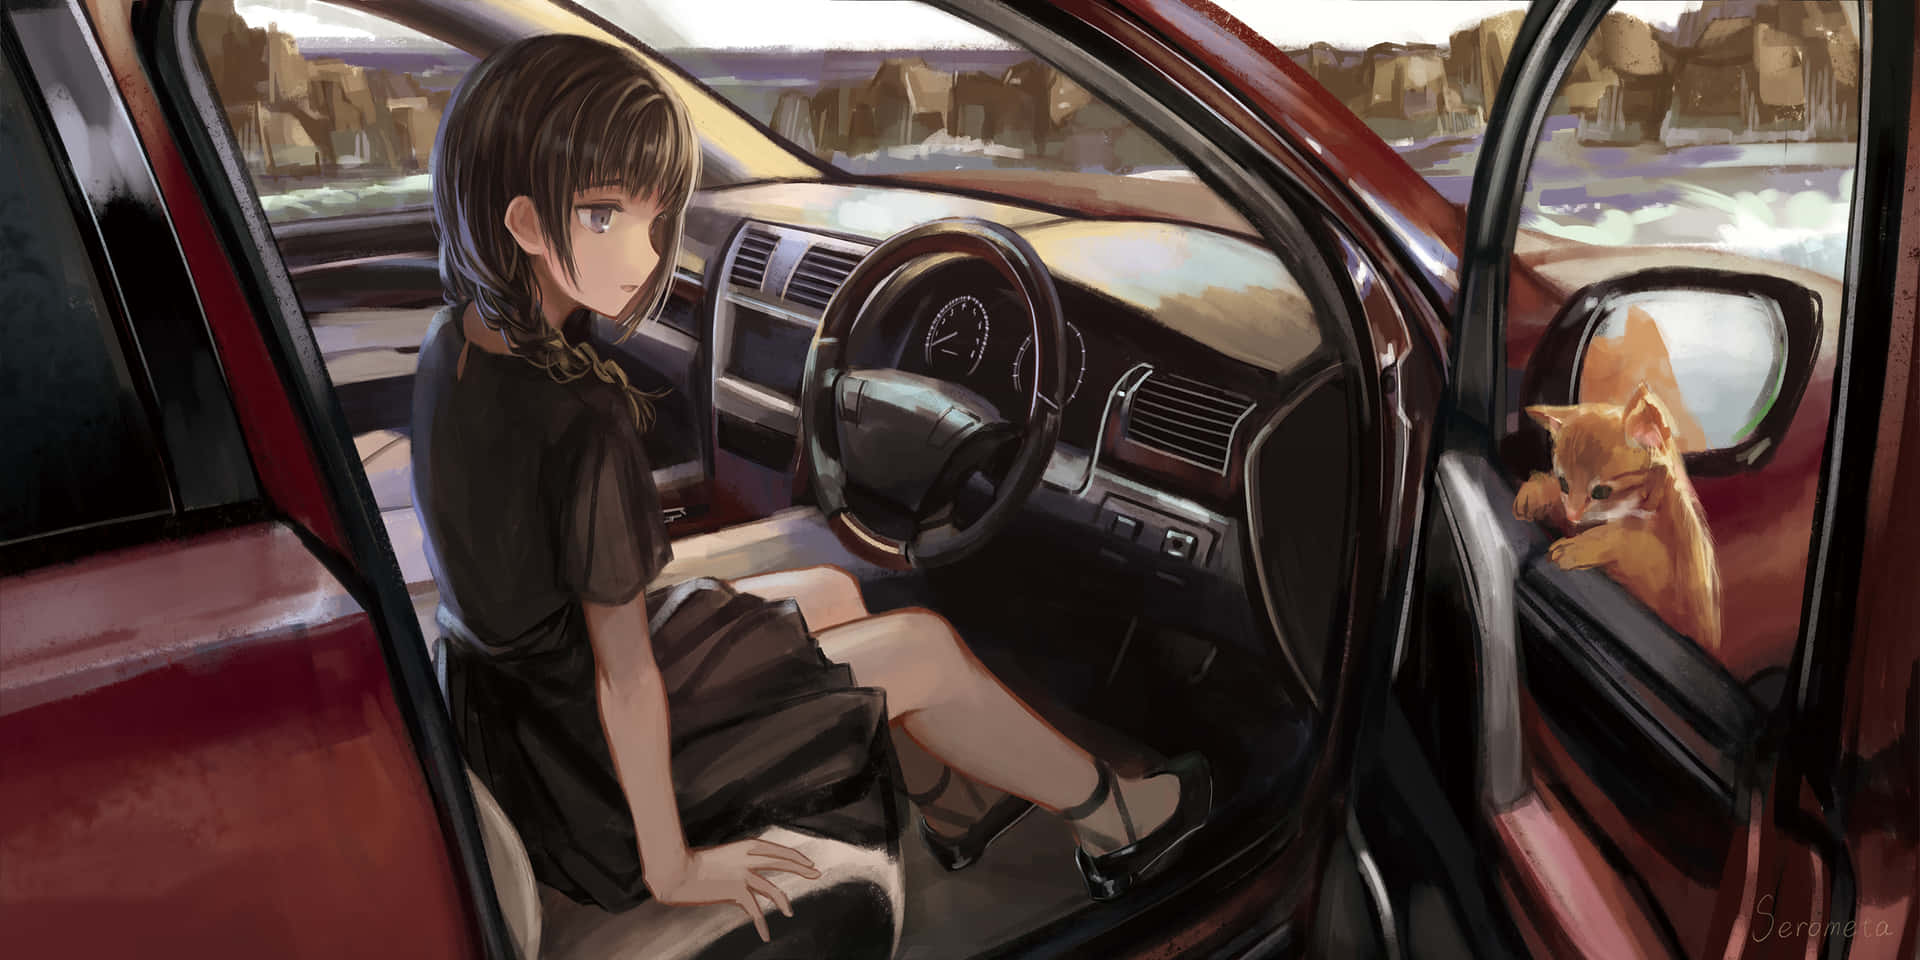 Seated in the interior of a modern vehicle Wallpaper